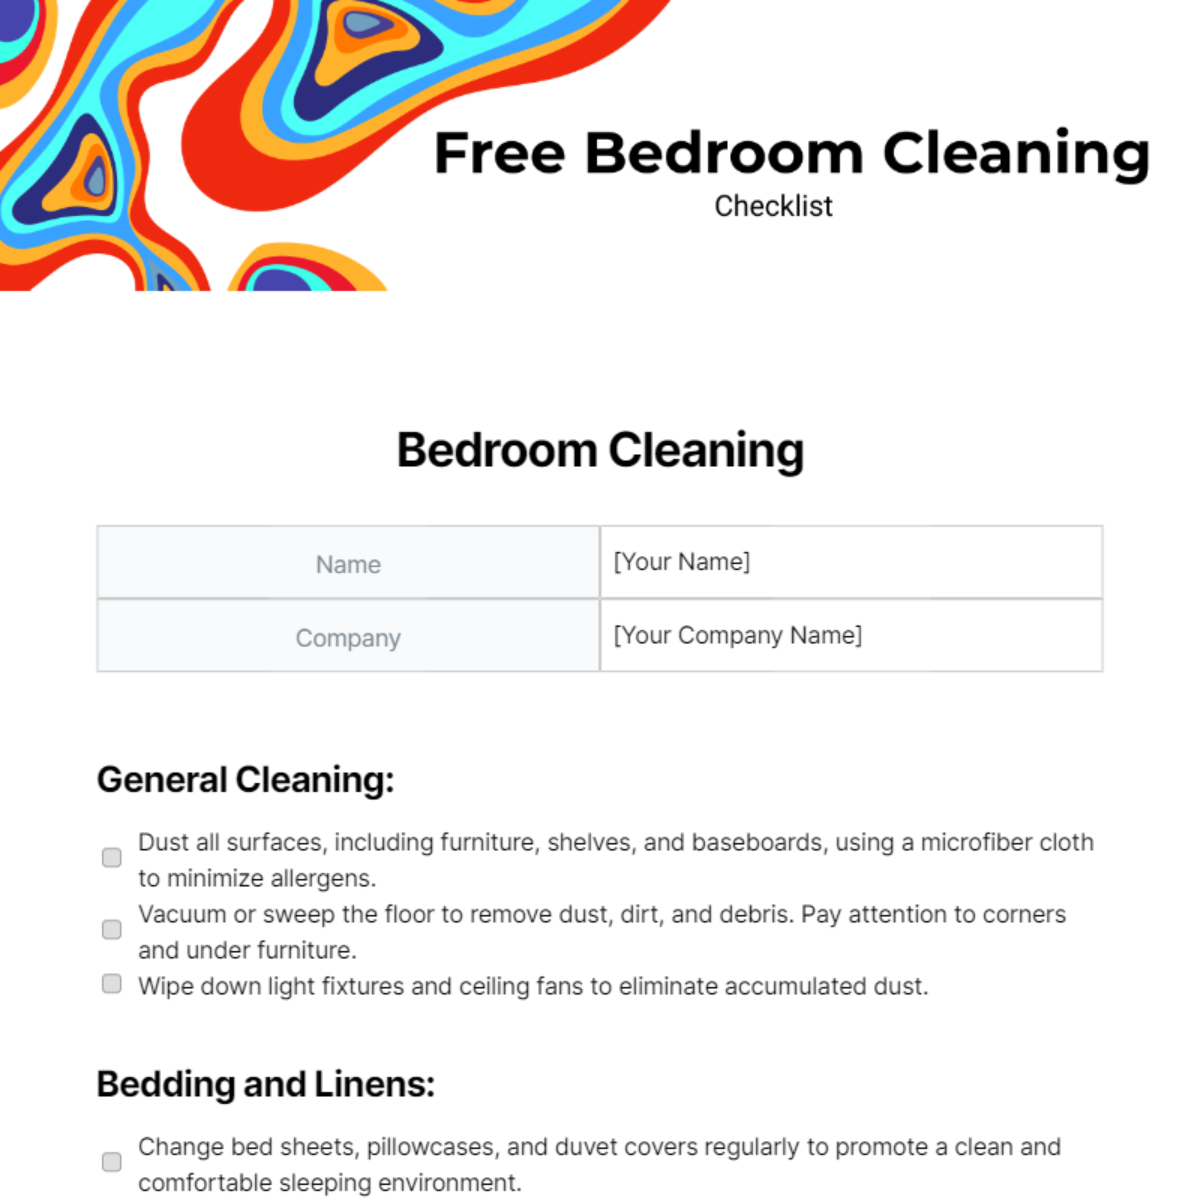 Free Bedroom Cleaning Checklist Template